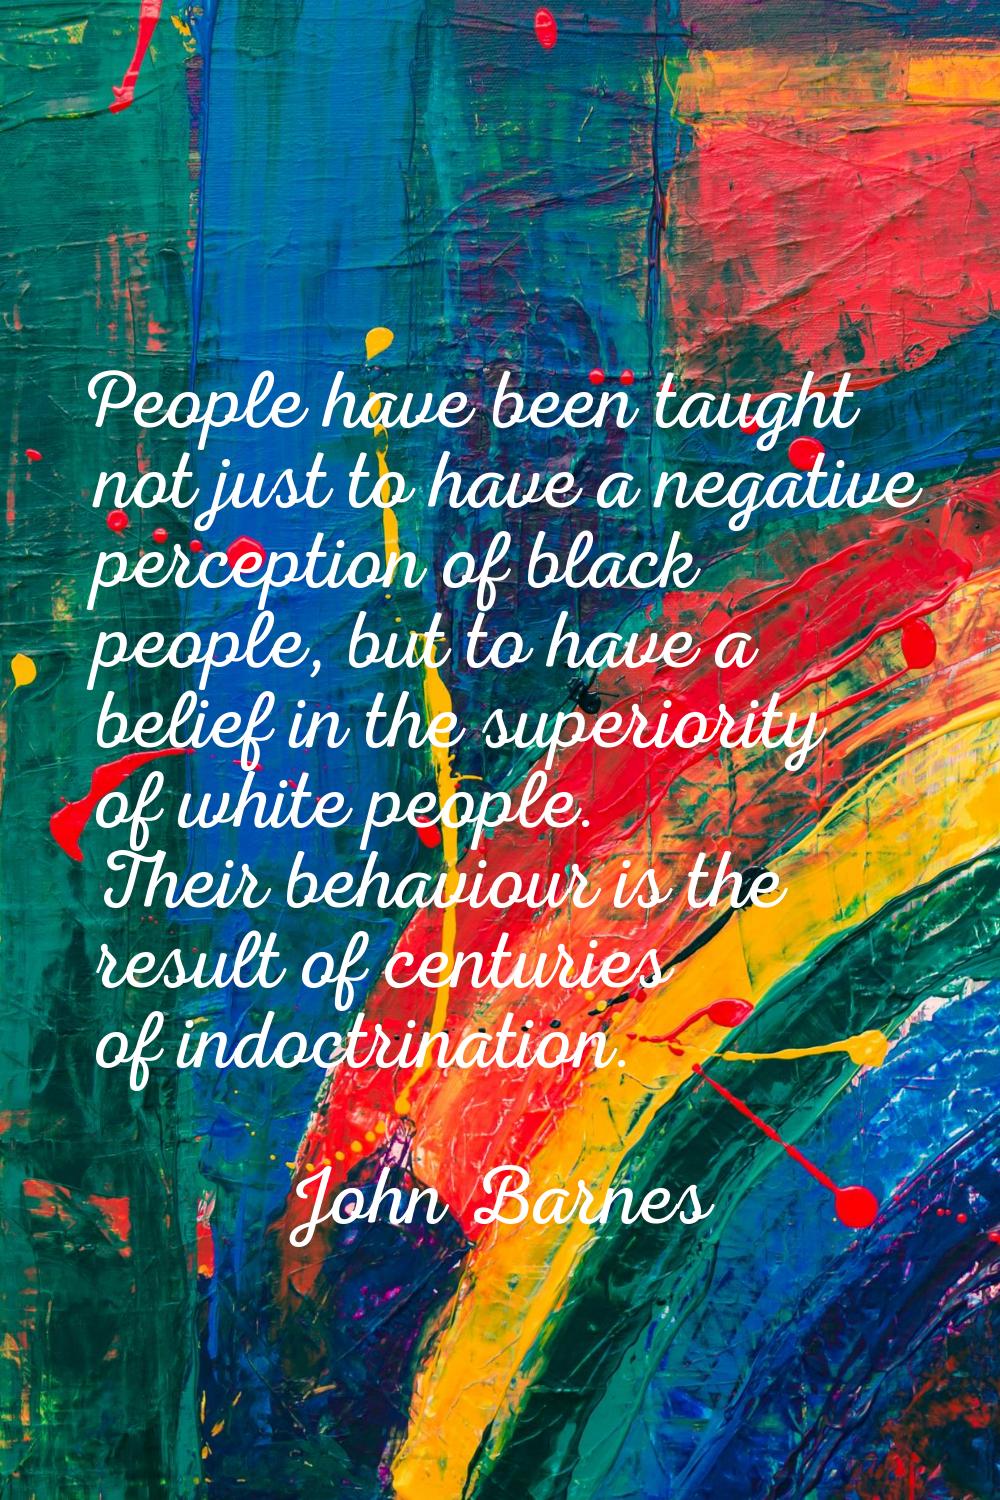 People have been taught not just to have a negative perception of black people, but to have a belie